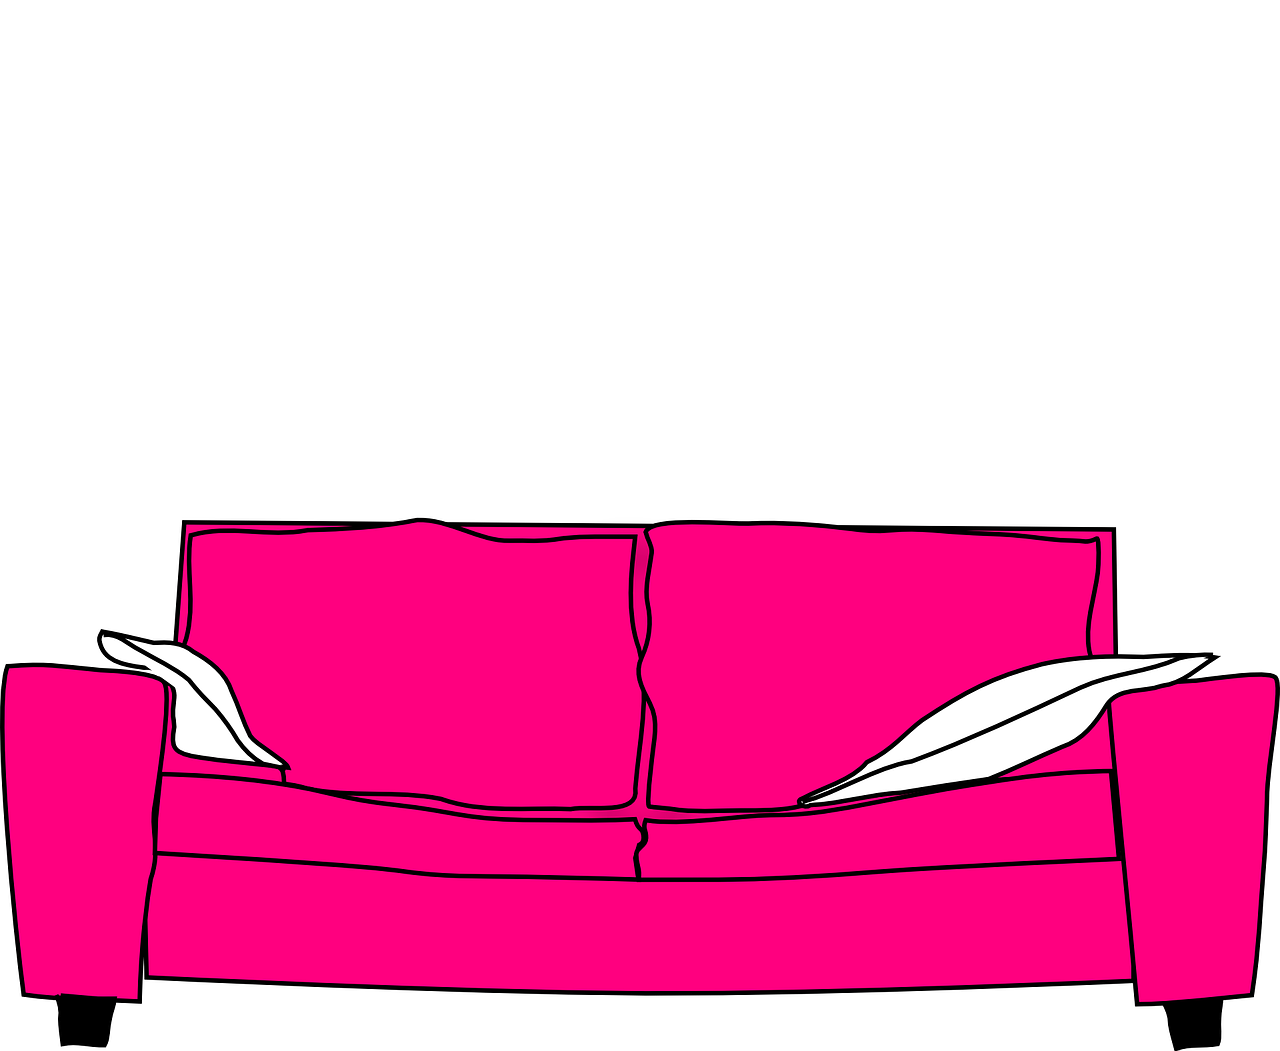 pink furniture couch free photo